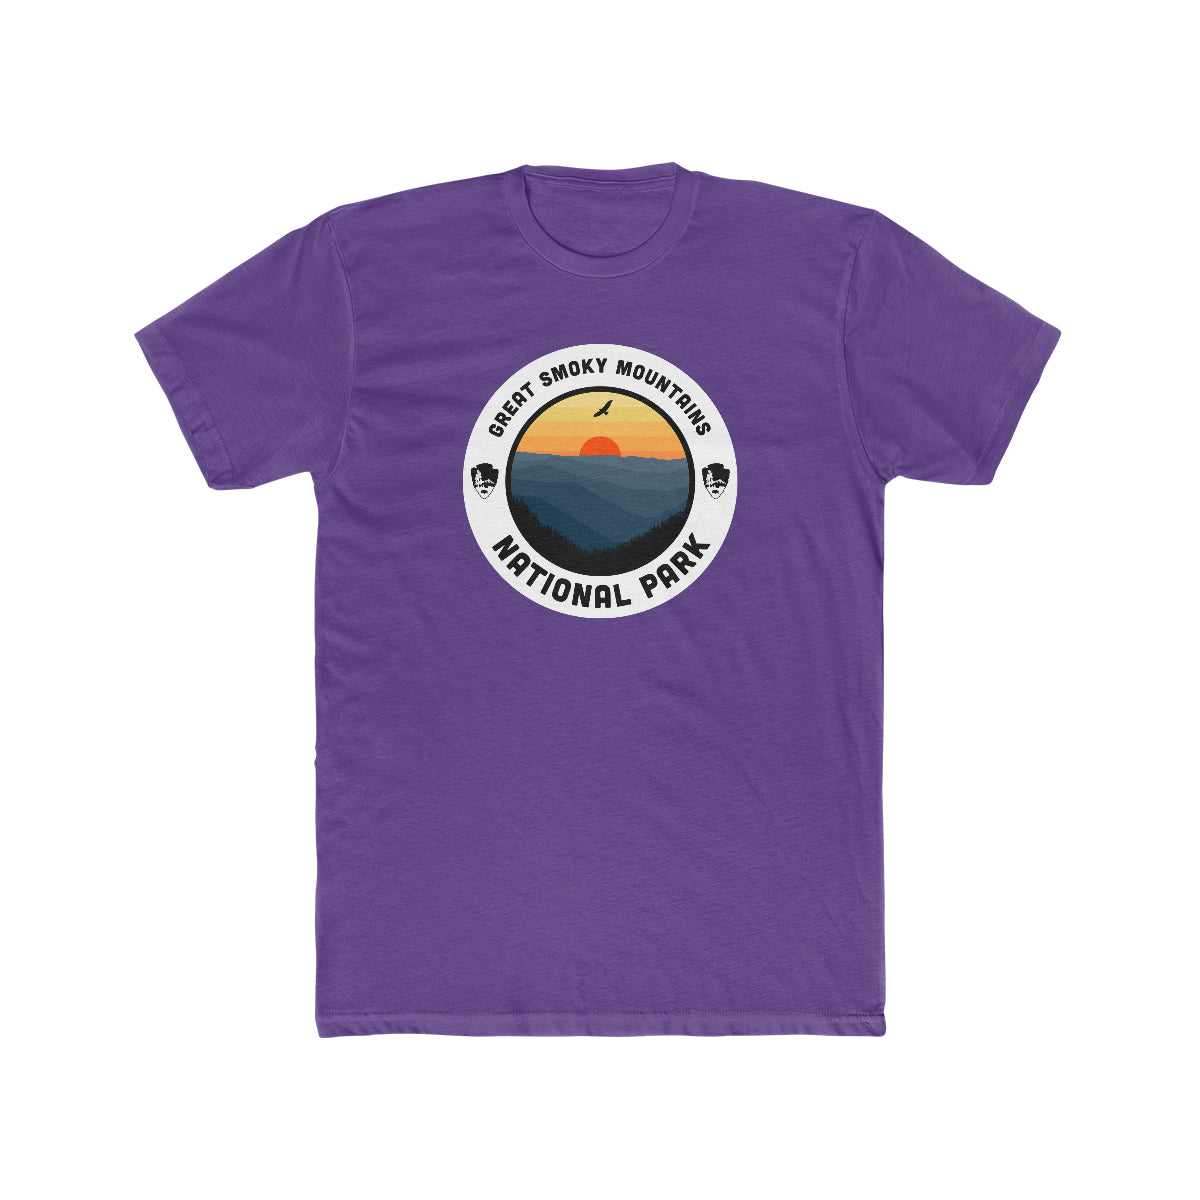 Great Smoky Mountains National Park T-Shirt - Round Badge Design